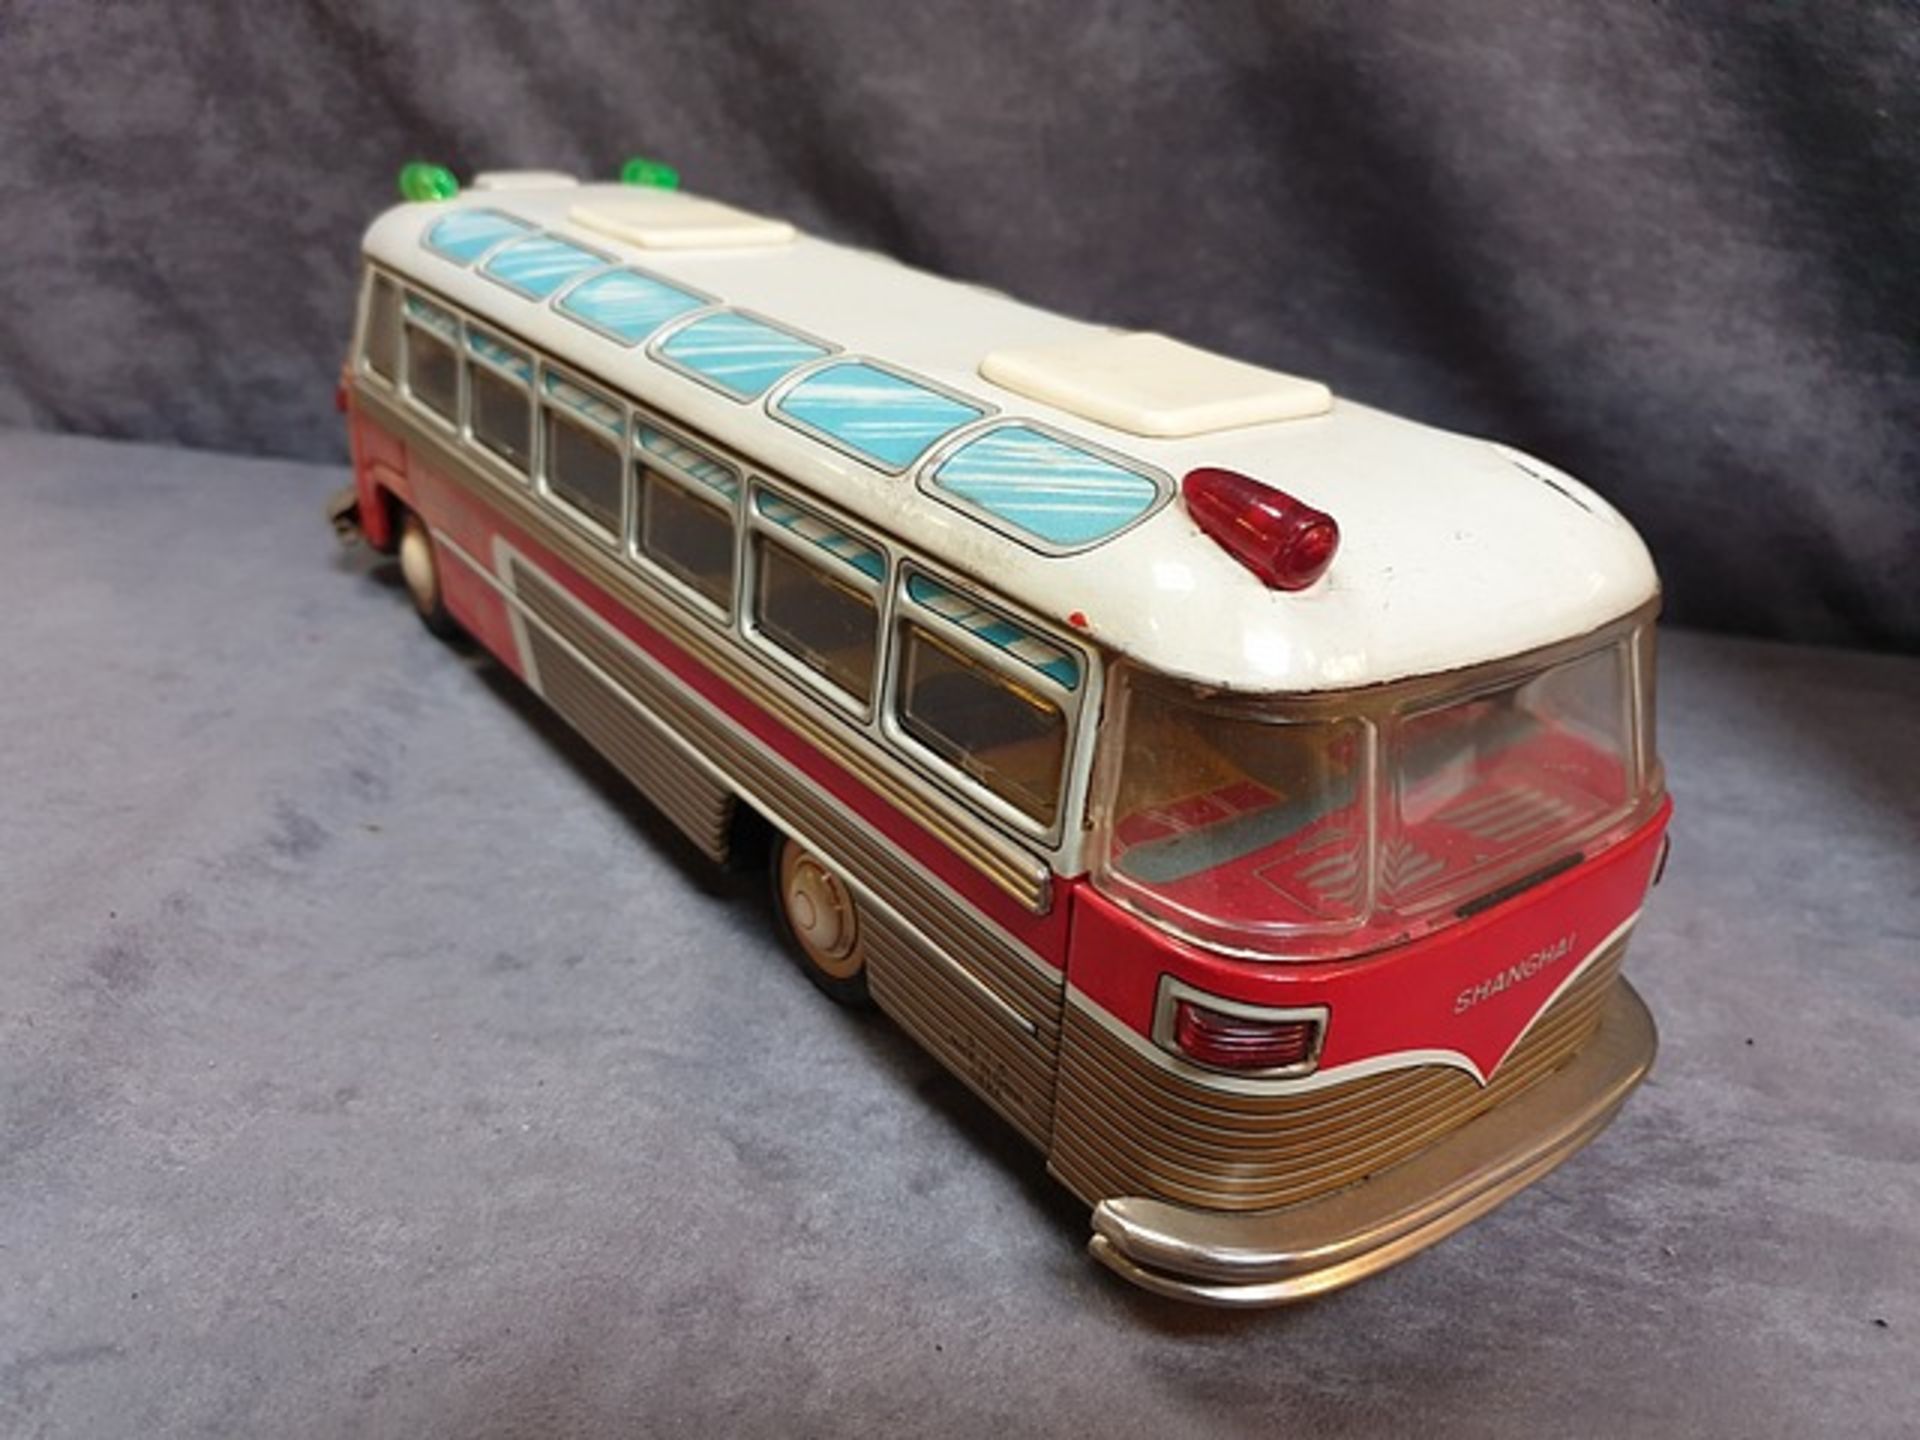 Vintage red china Large friction Shanghai red touring bus MF-812 with siren noise - Image 2 of 2